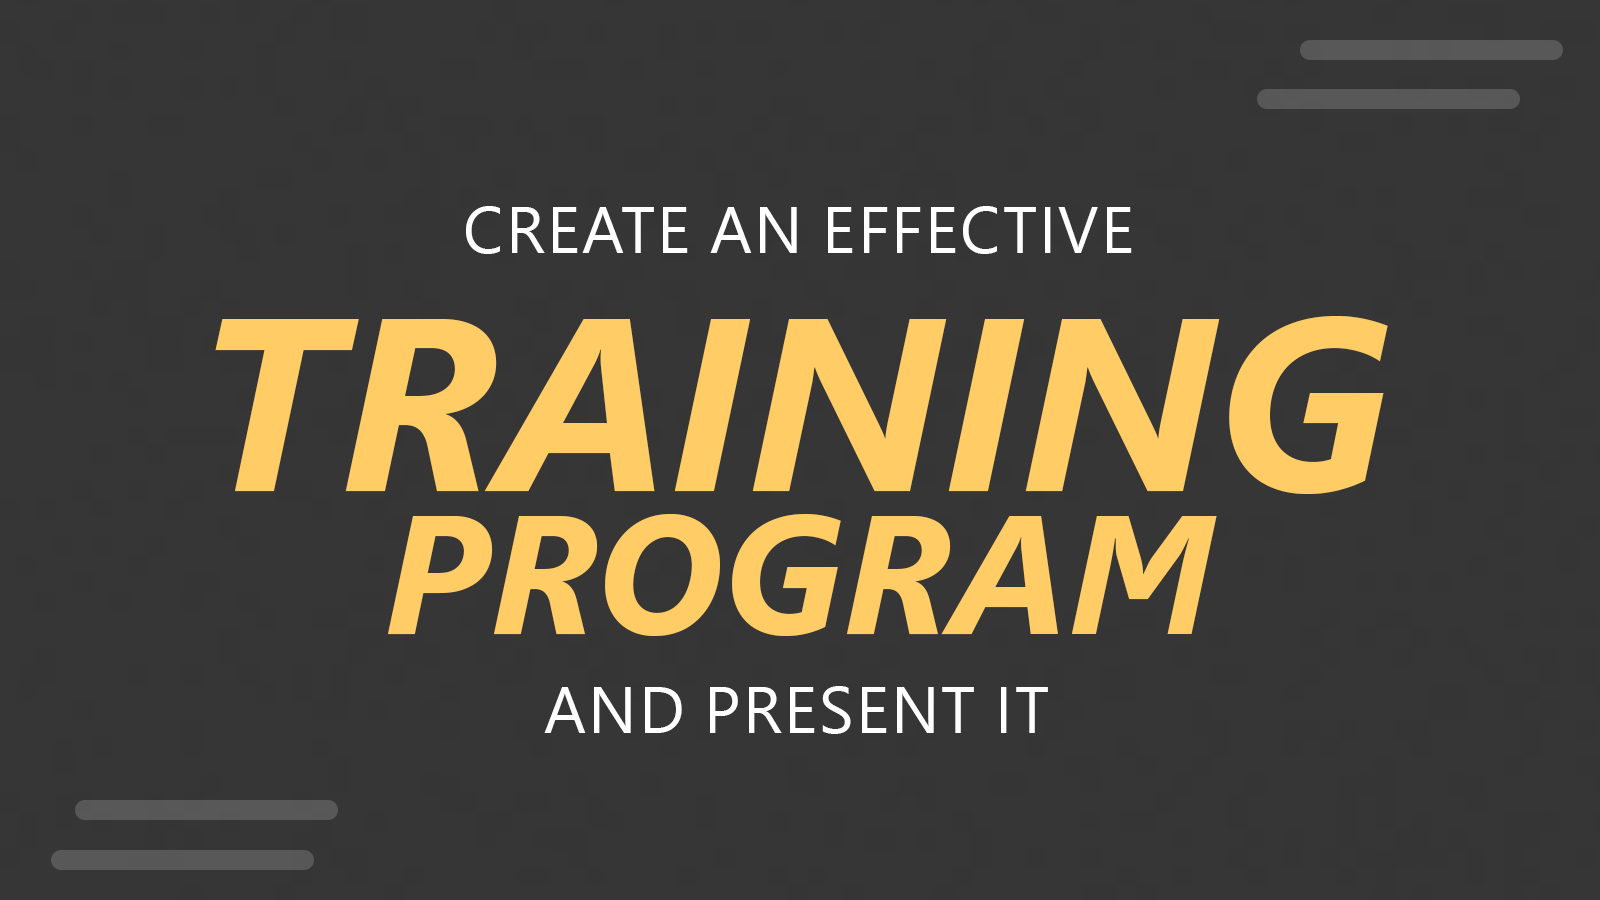 How to Create an Effective Training Program and Present It? (An Actionable 5-Step Guide)